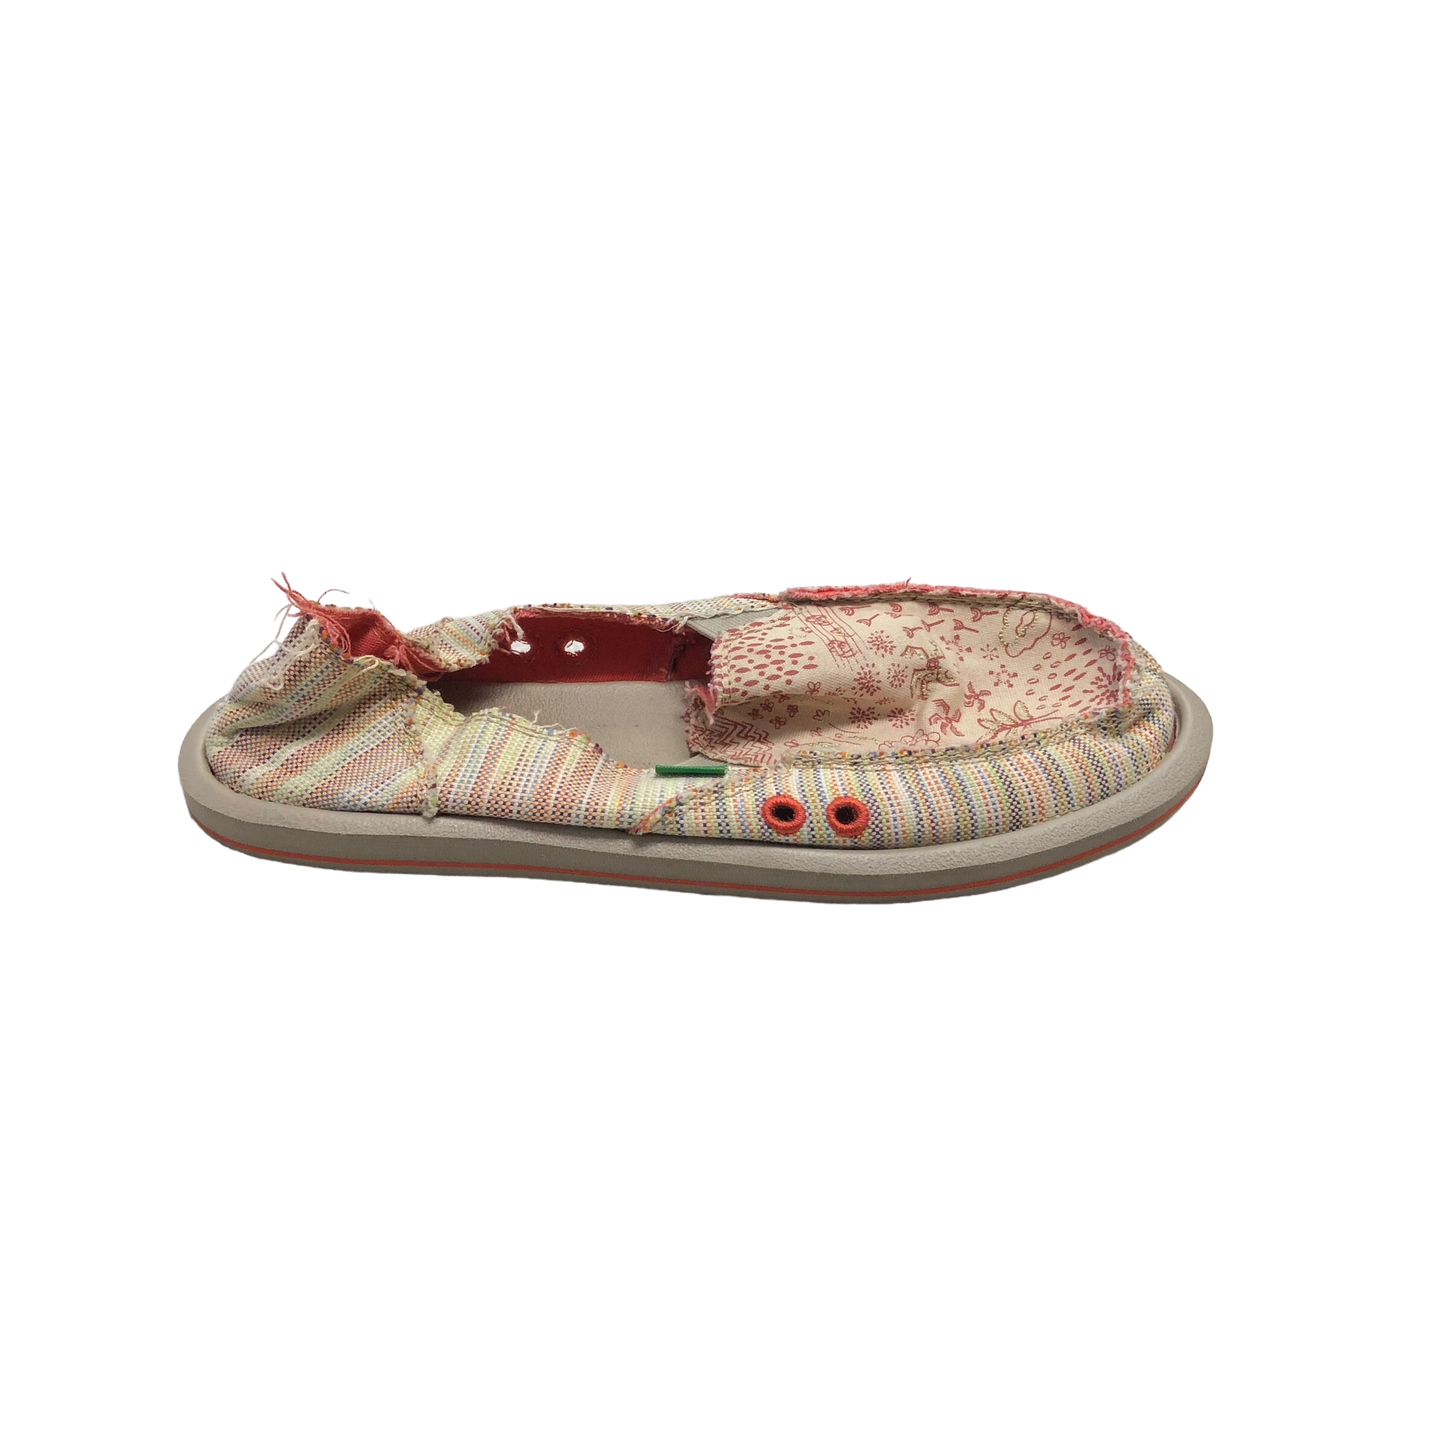 Cream & Red Shoes Flats Sanuk, Size 8